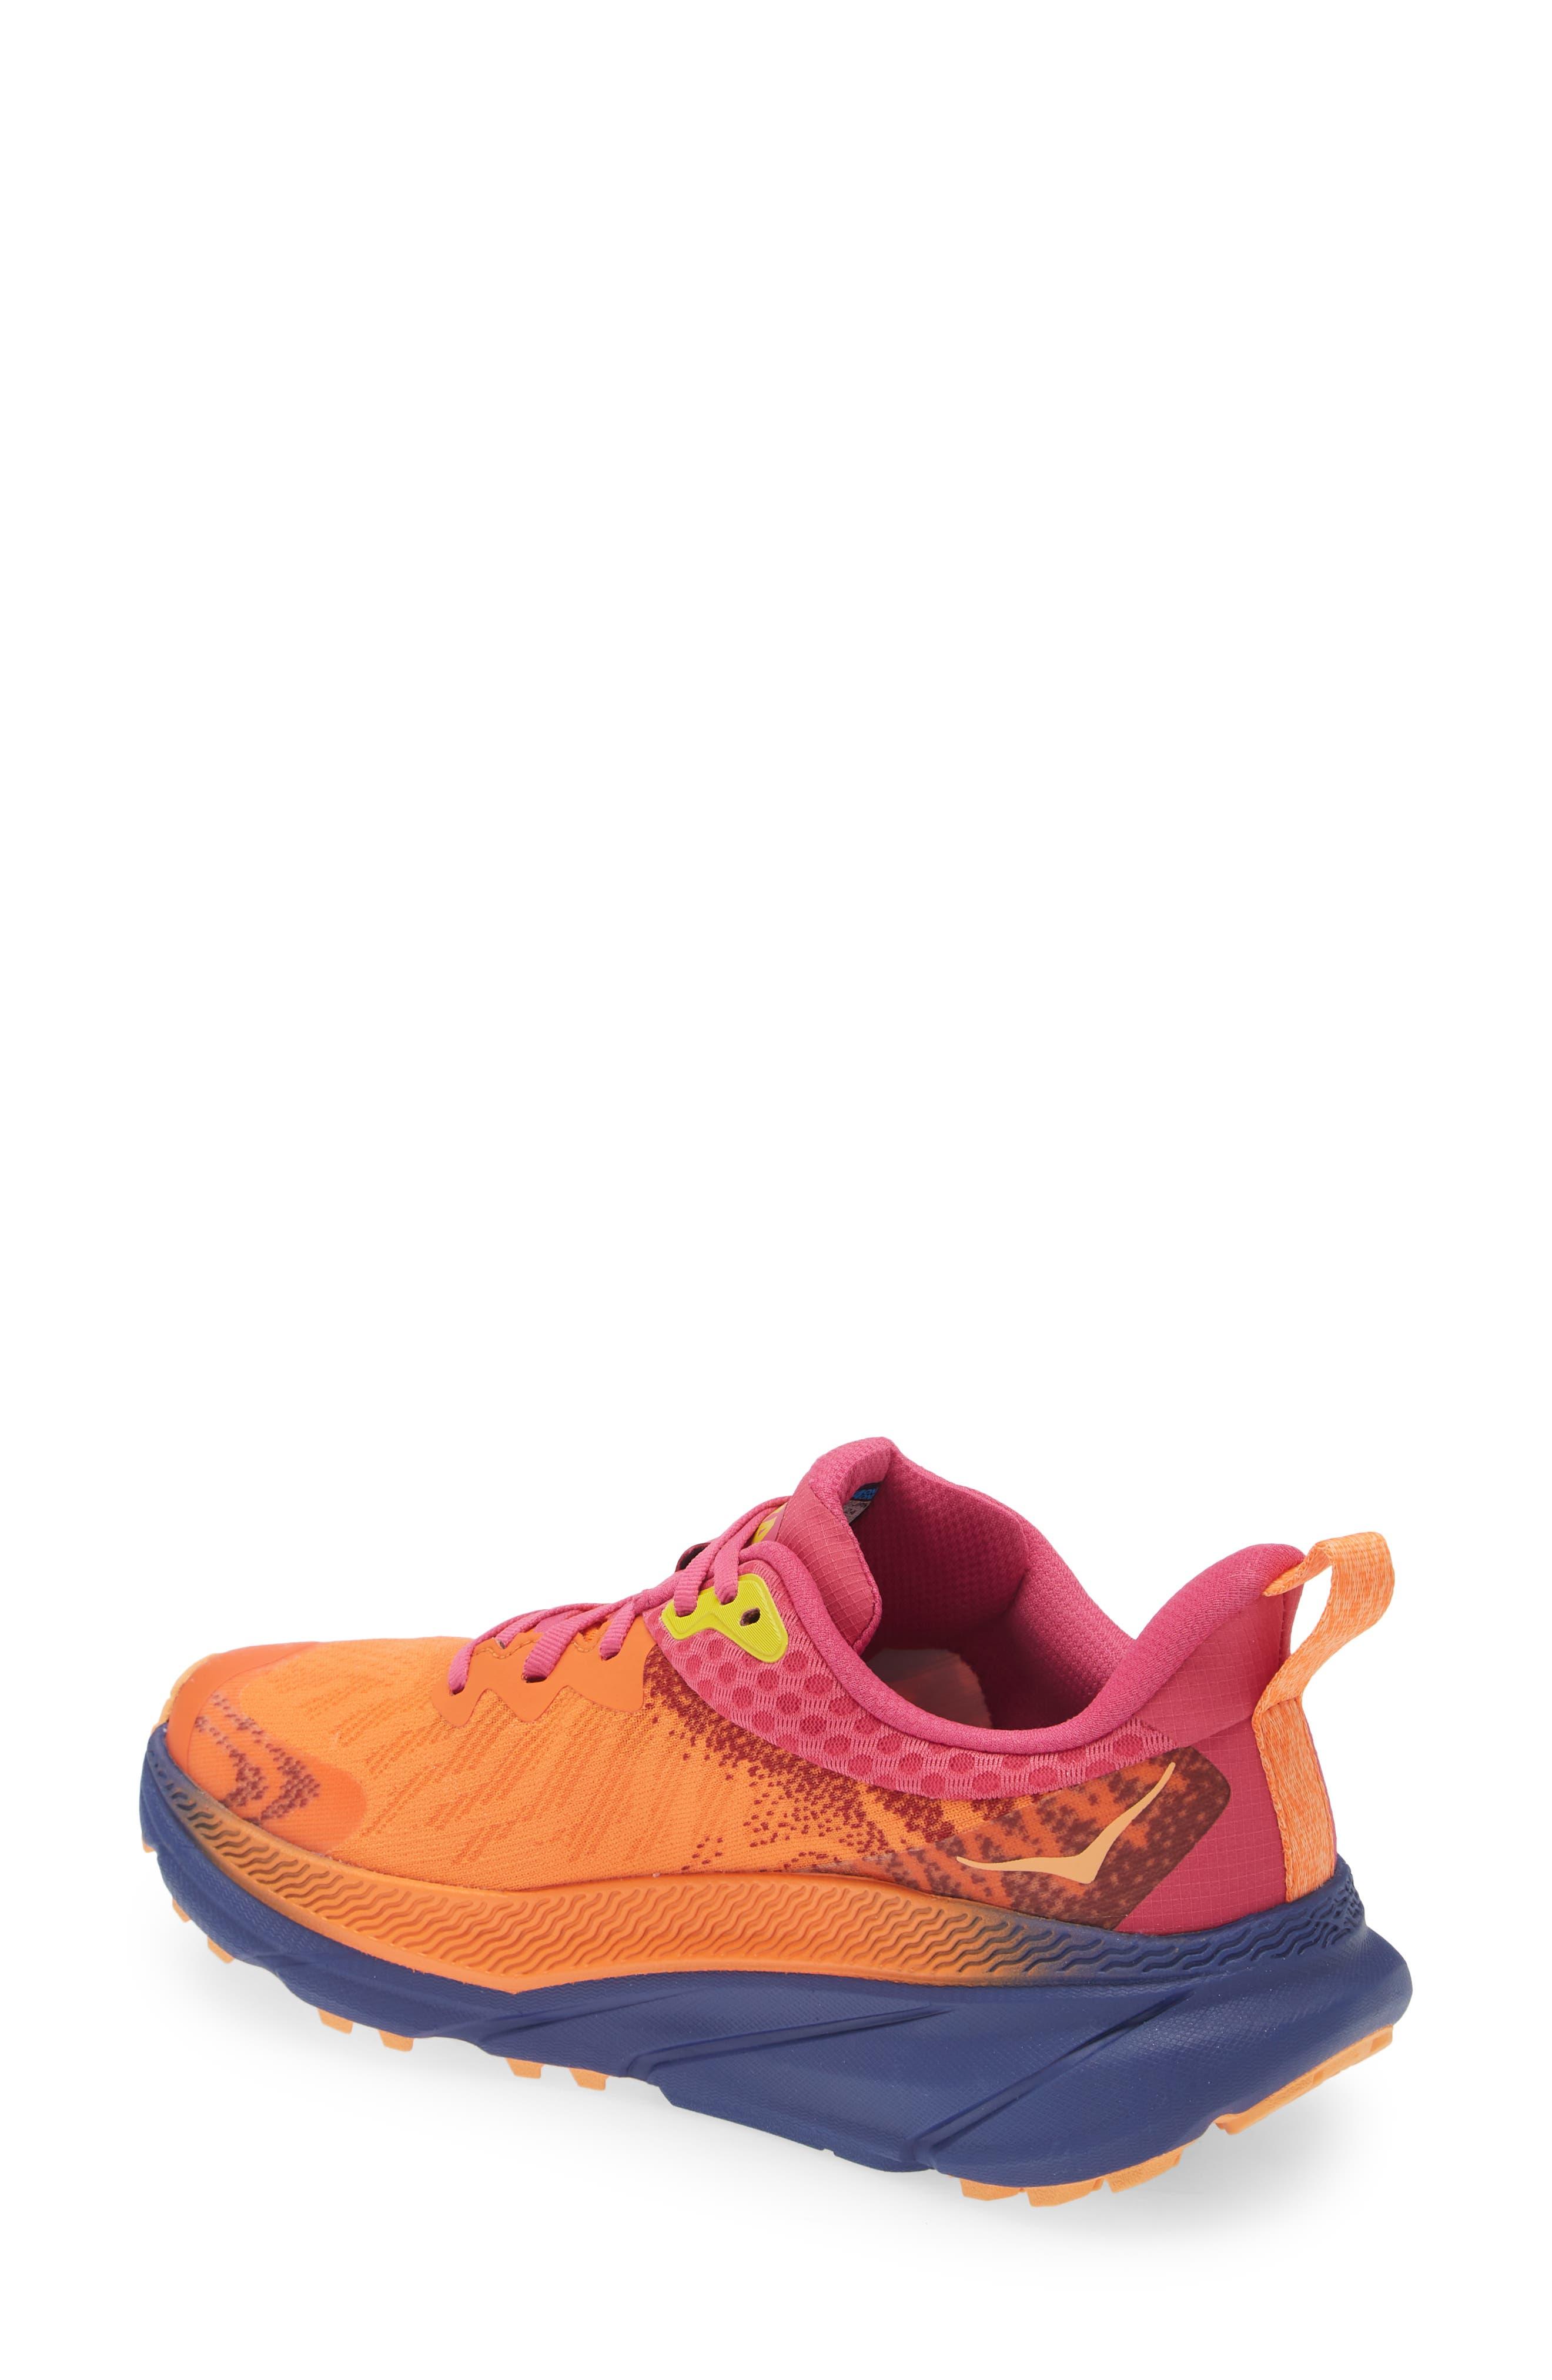 Hoka One One Challenger Atr 7 Running Shoe in Pink | Lyst